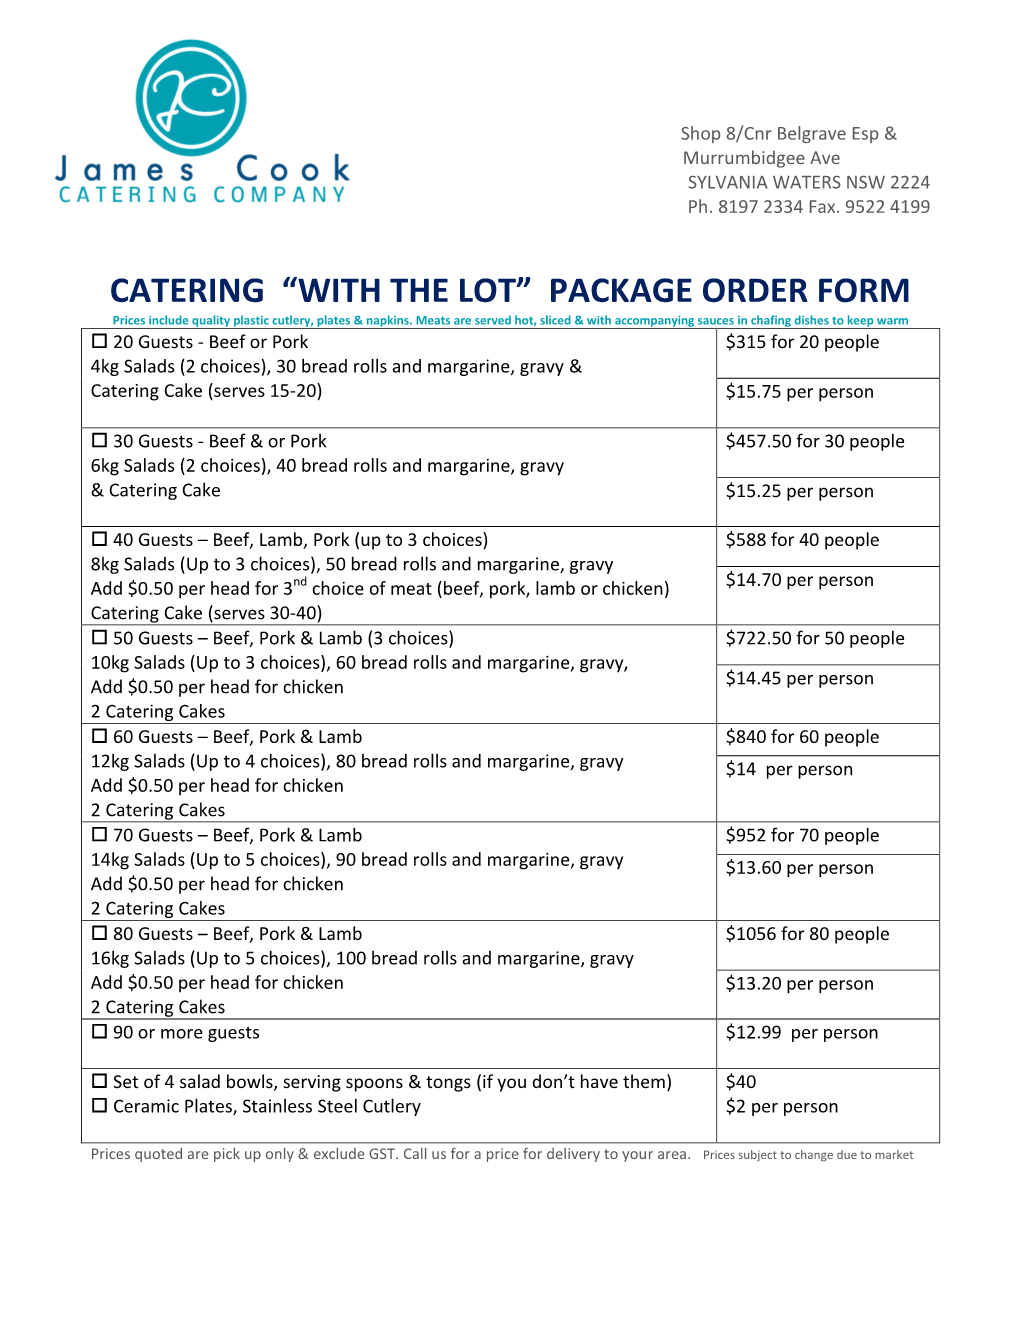 Catering with the Lot Package Order Form